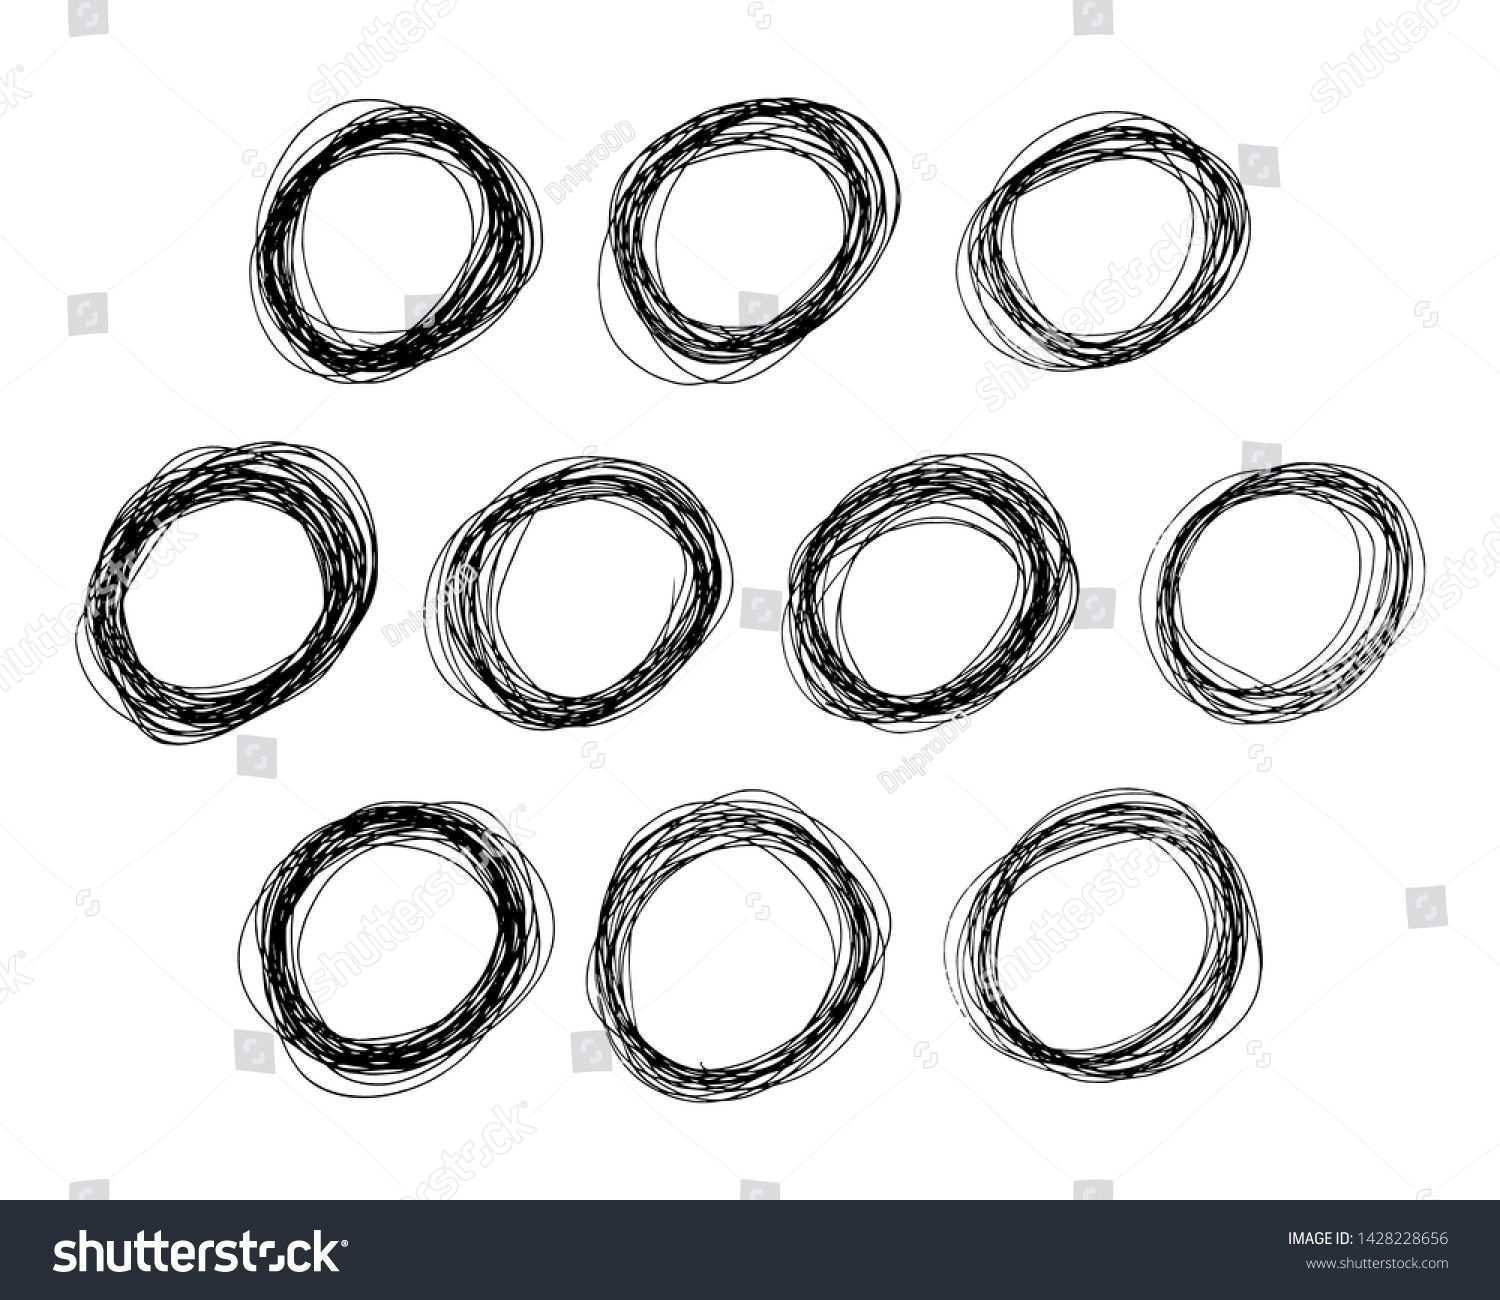 Set Of Ten Sketch Hand Drawn Ellipse Shapes Abstract Pencil Scribble Drawing Vector Illustration Ad Spo In 2020 How To Draw Hands Scribble Drawing Ellipse Shape